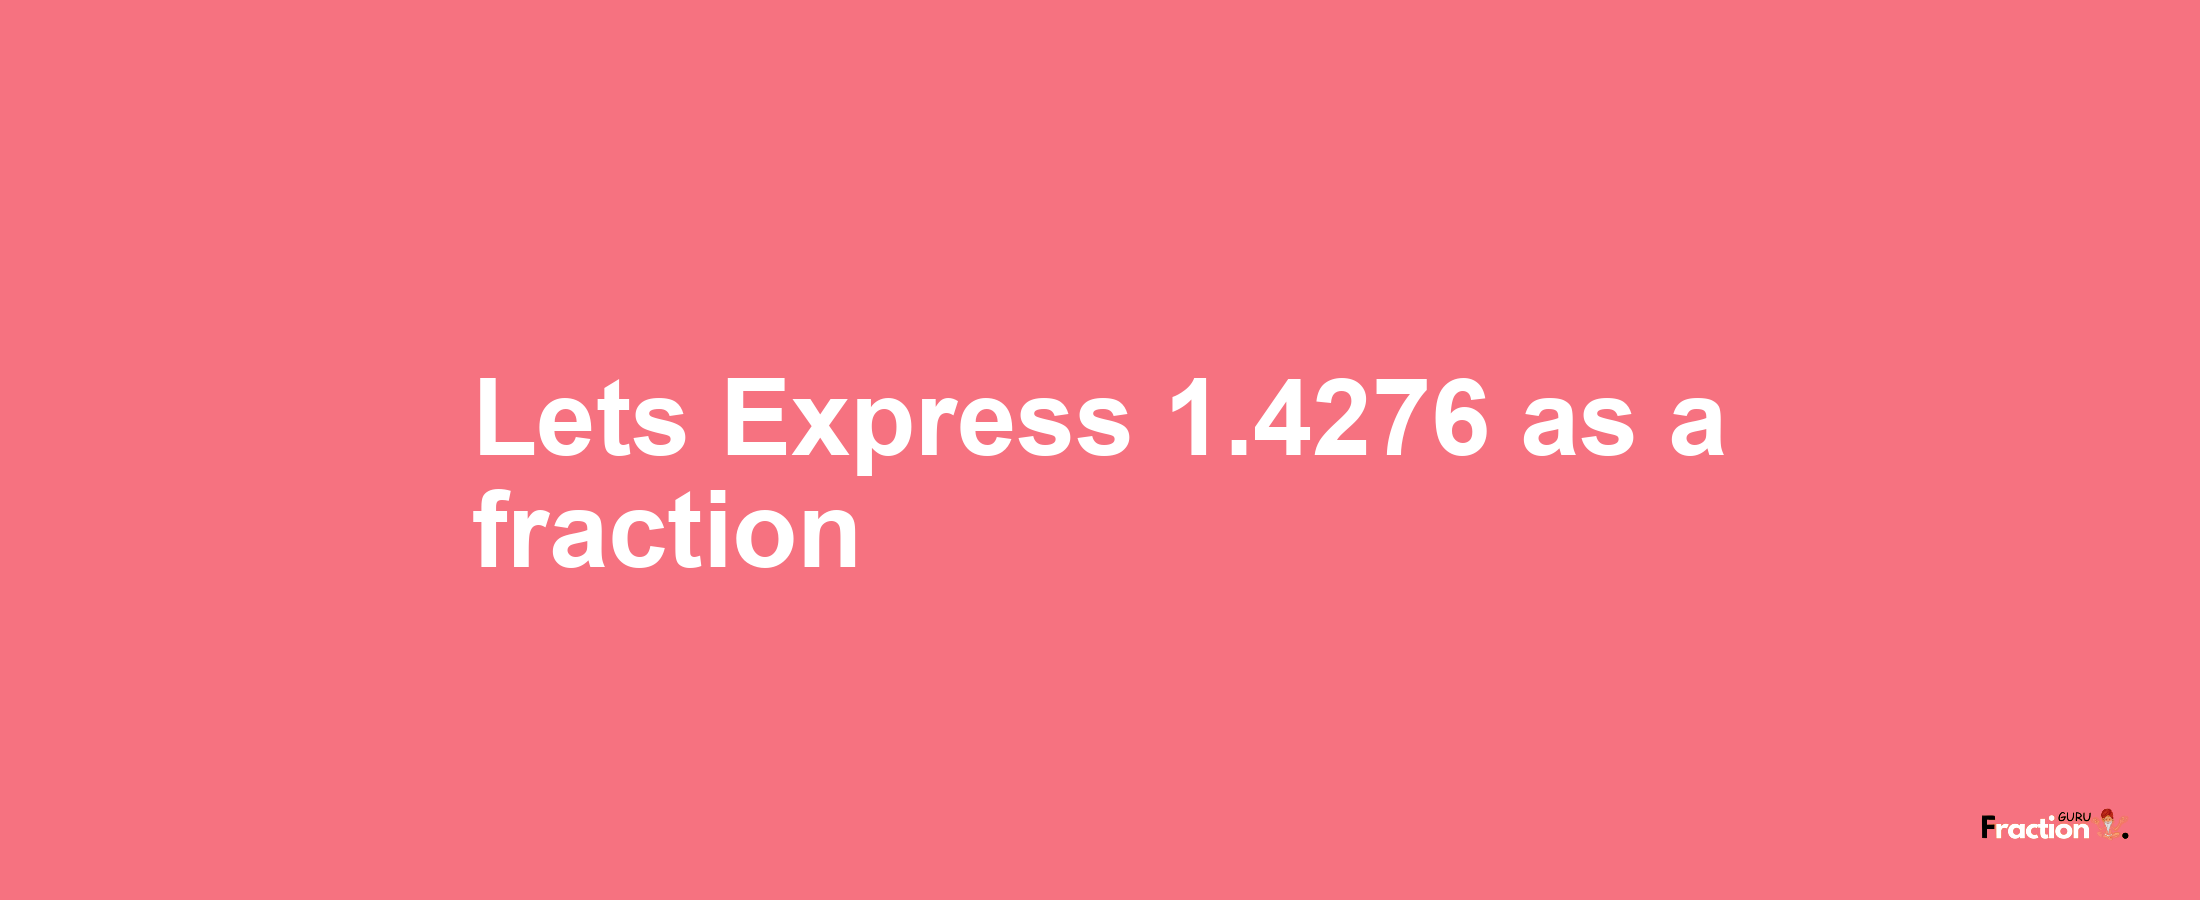 Lets Express 1.4276 as afraction